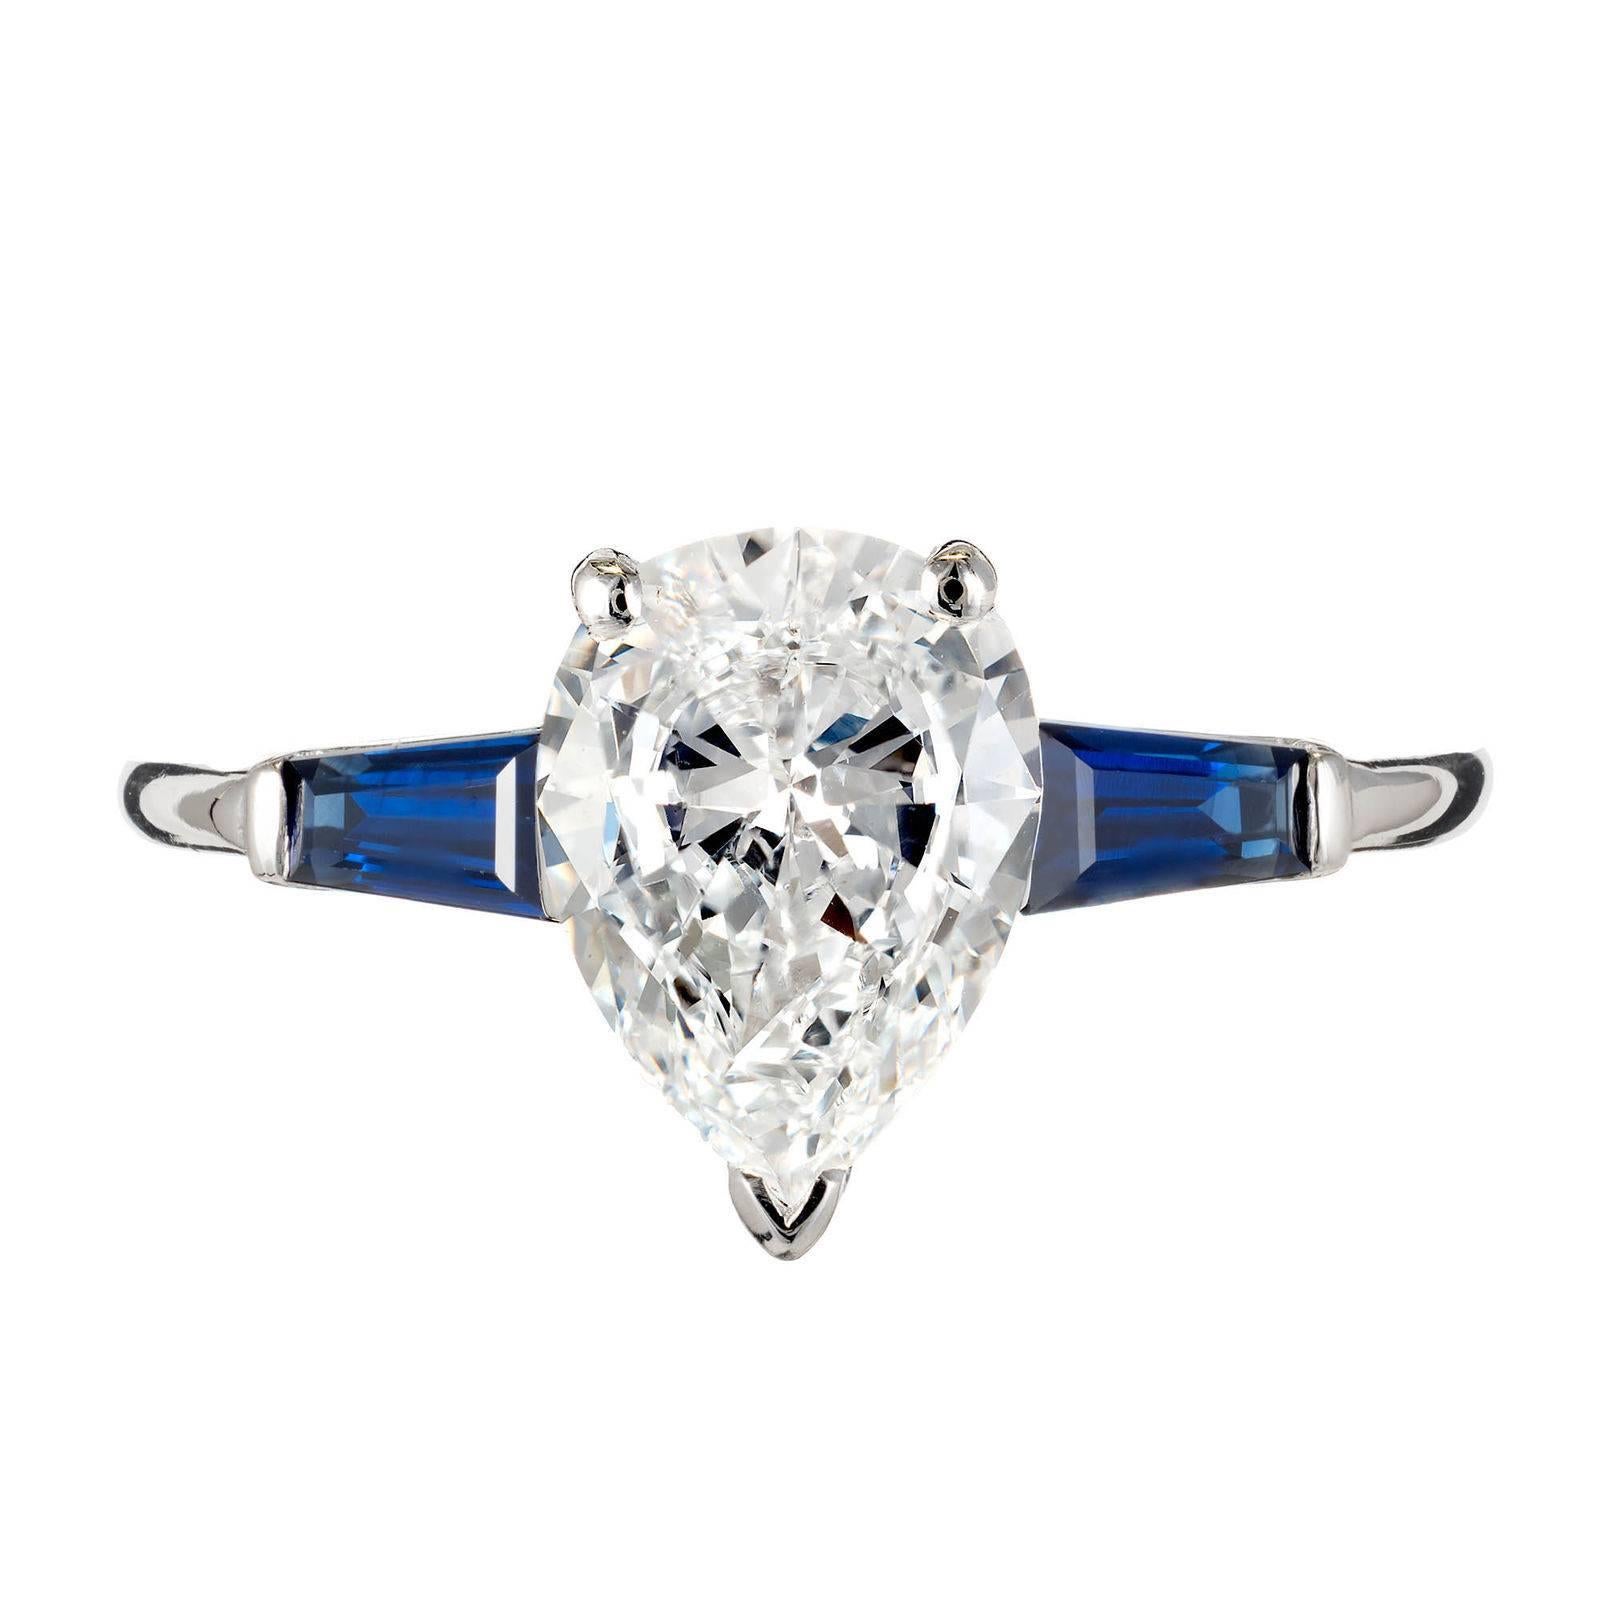 Van Cleef & Arpels 1960s fine pear shape Diamond and sapphire three-stone engagement ring. Platinum setting with blue Sapphire Baguettes. 

Platinum
1 pear Diamond, approx. total weight 1.40cts, E, VS2, GIA certificate #2155623989
2 tapered fine